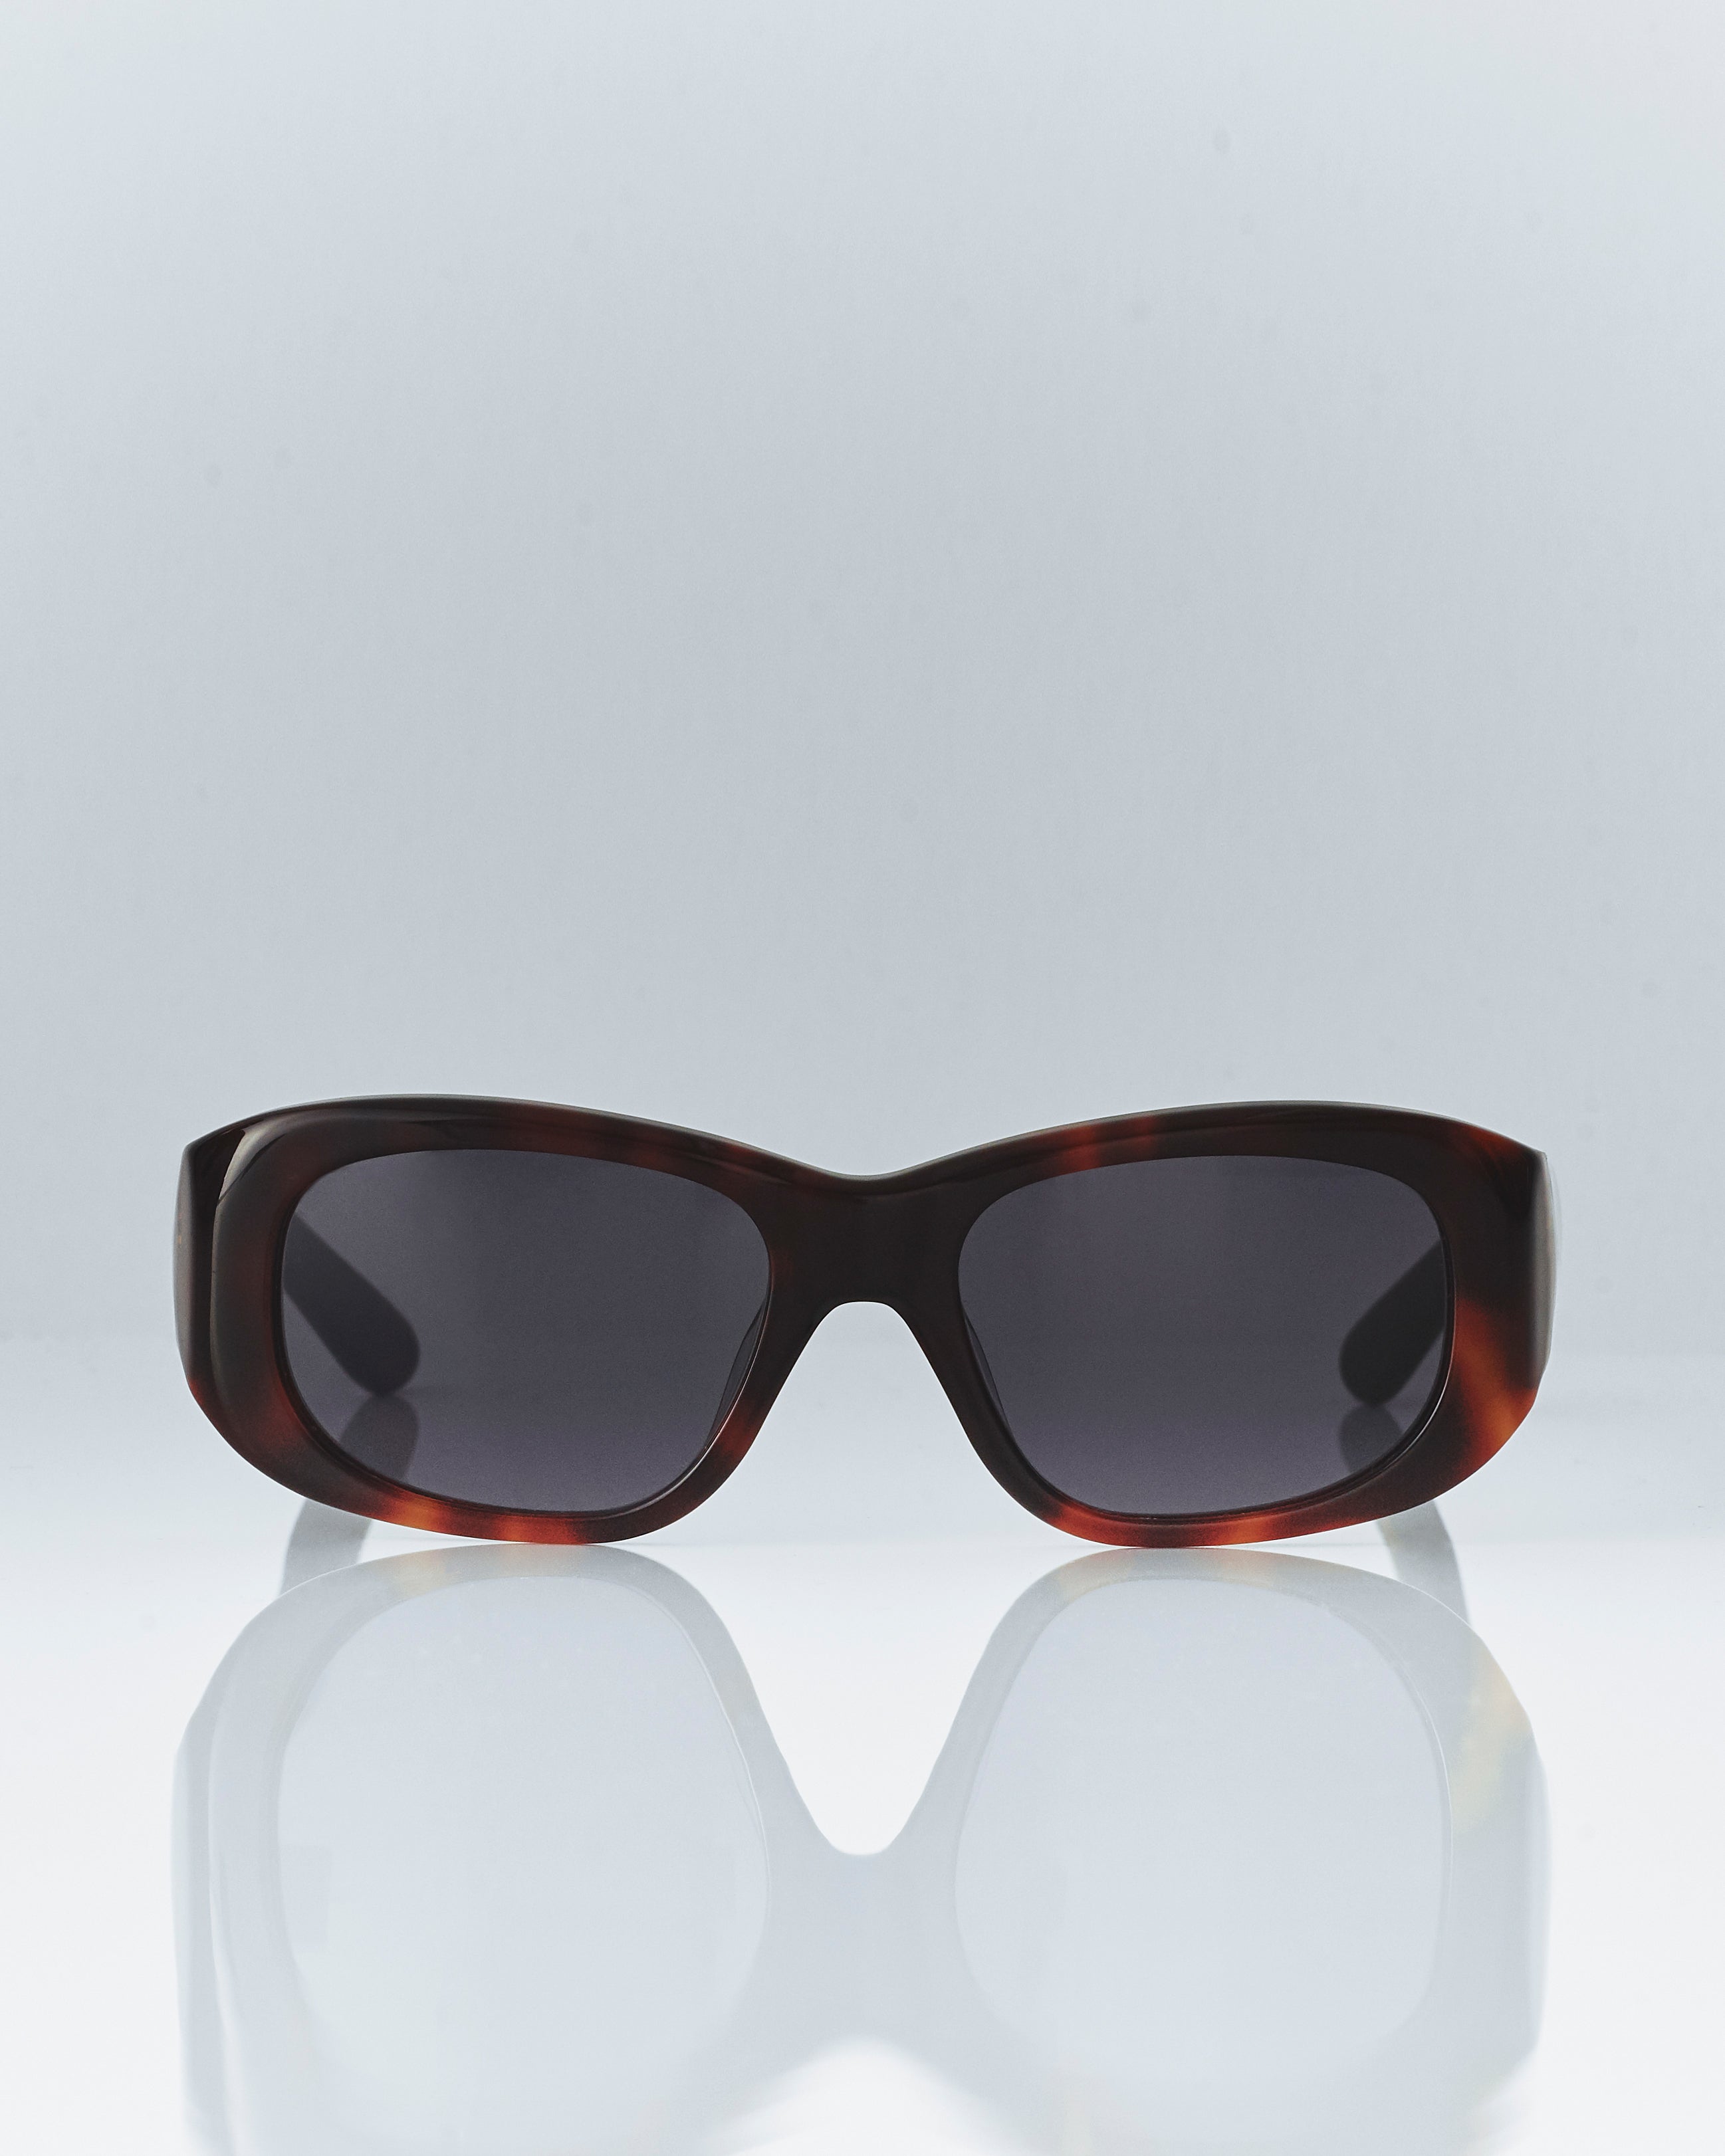 sunglasses, front view